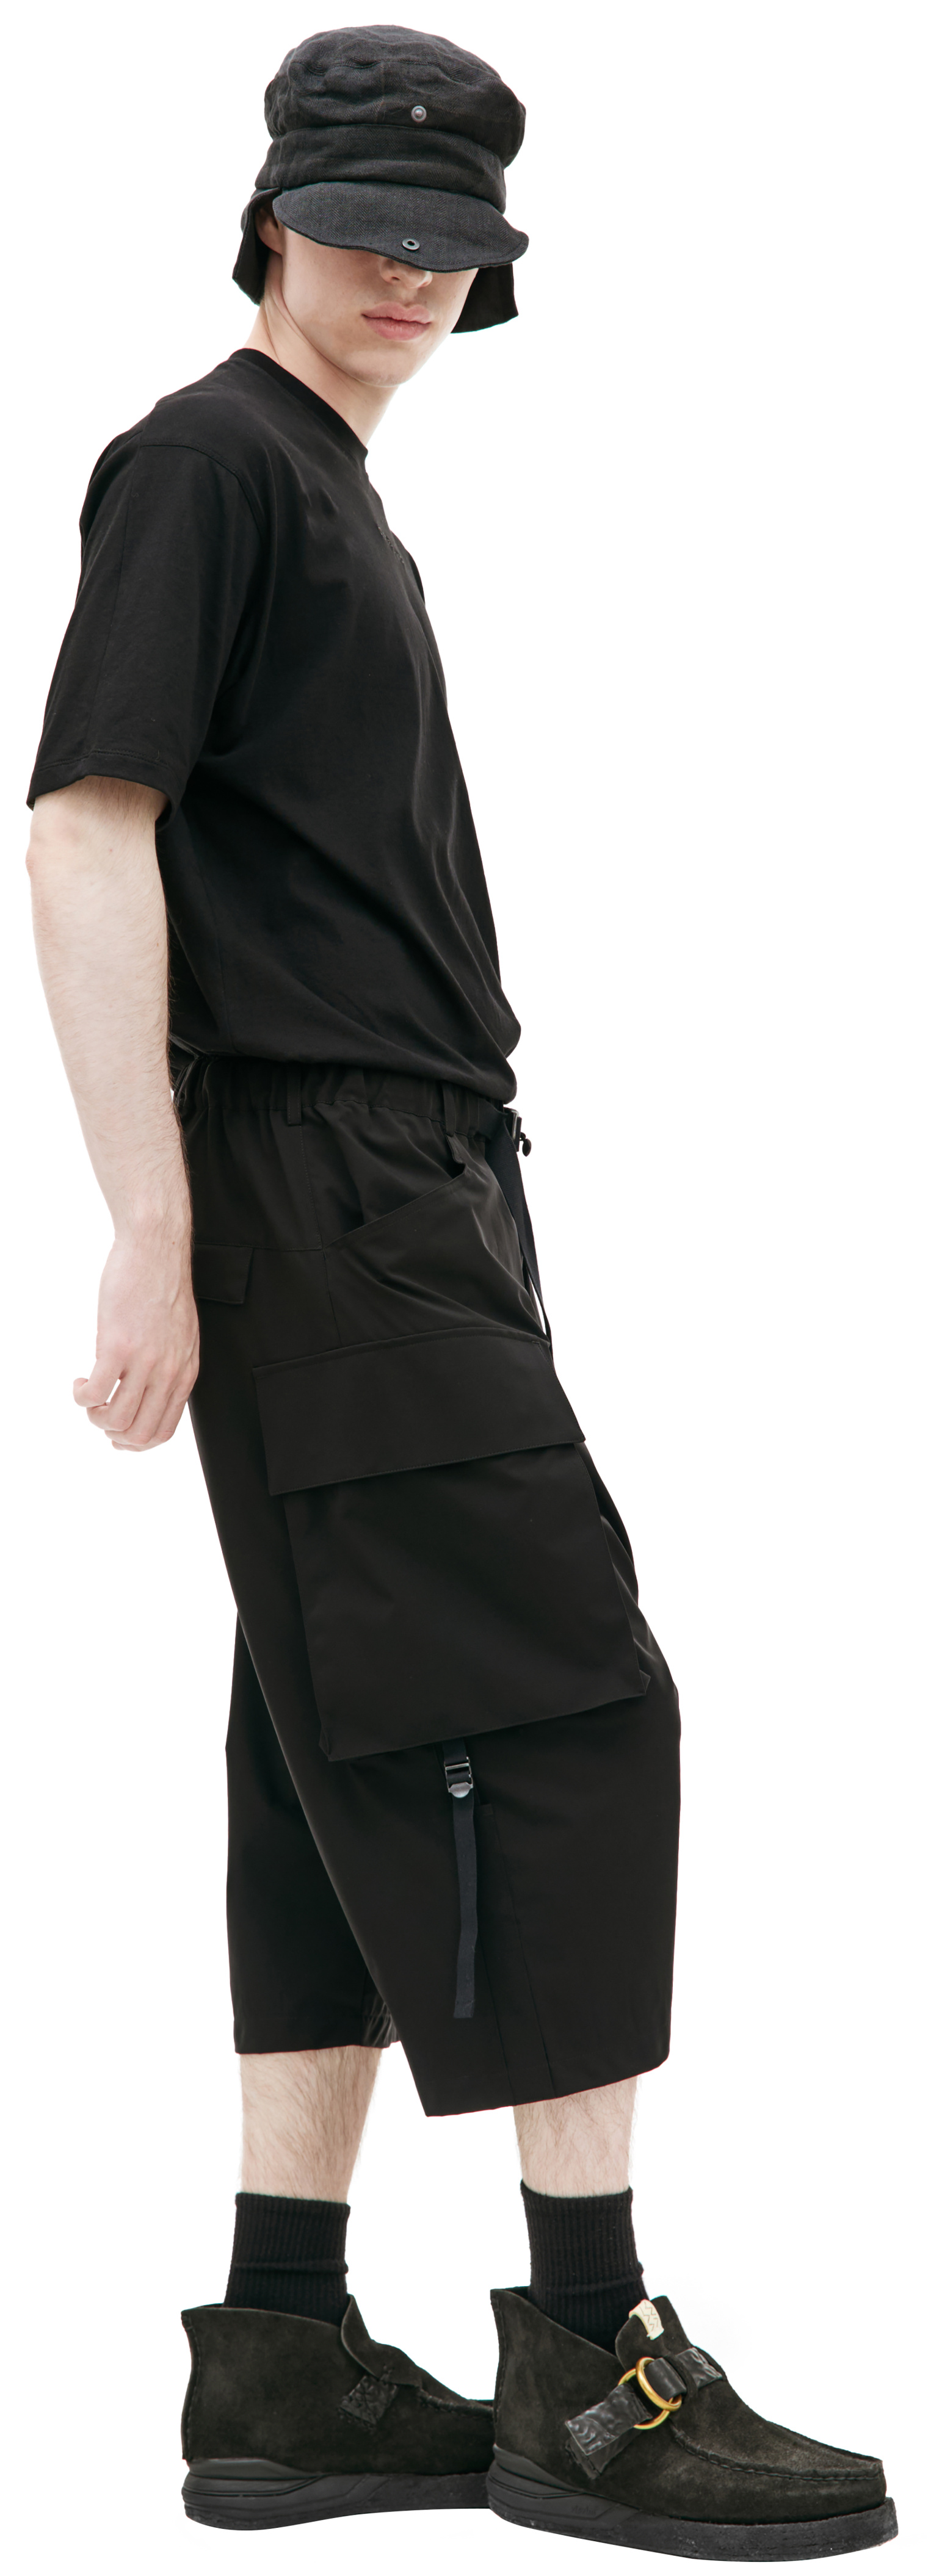 The Viridi-Anne Water-repellent cargo shorts